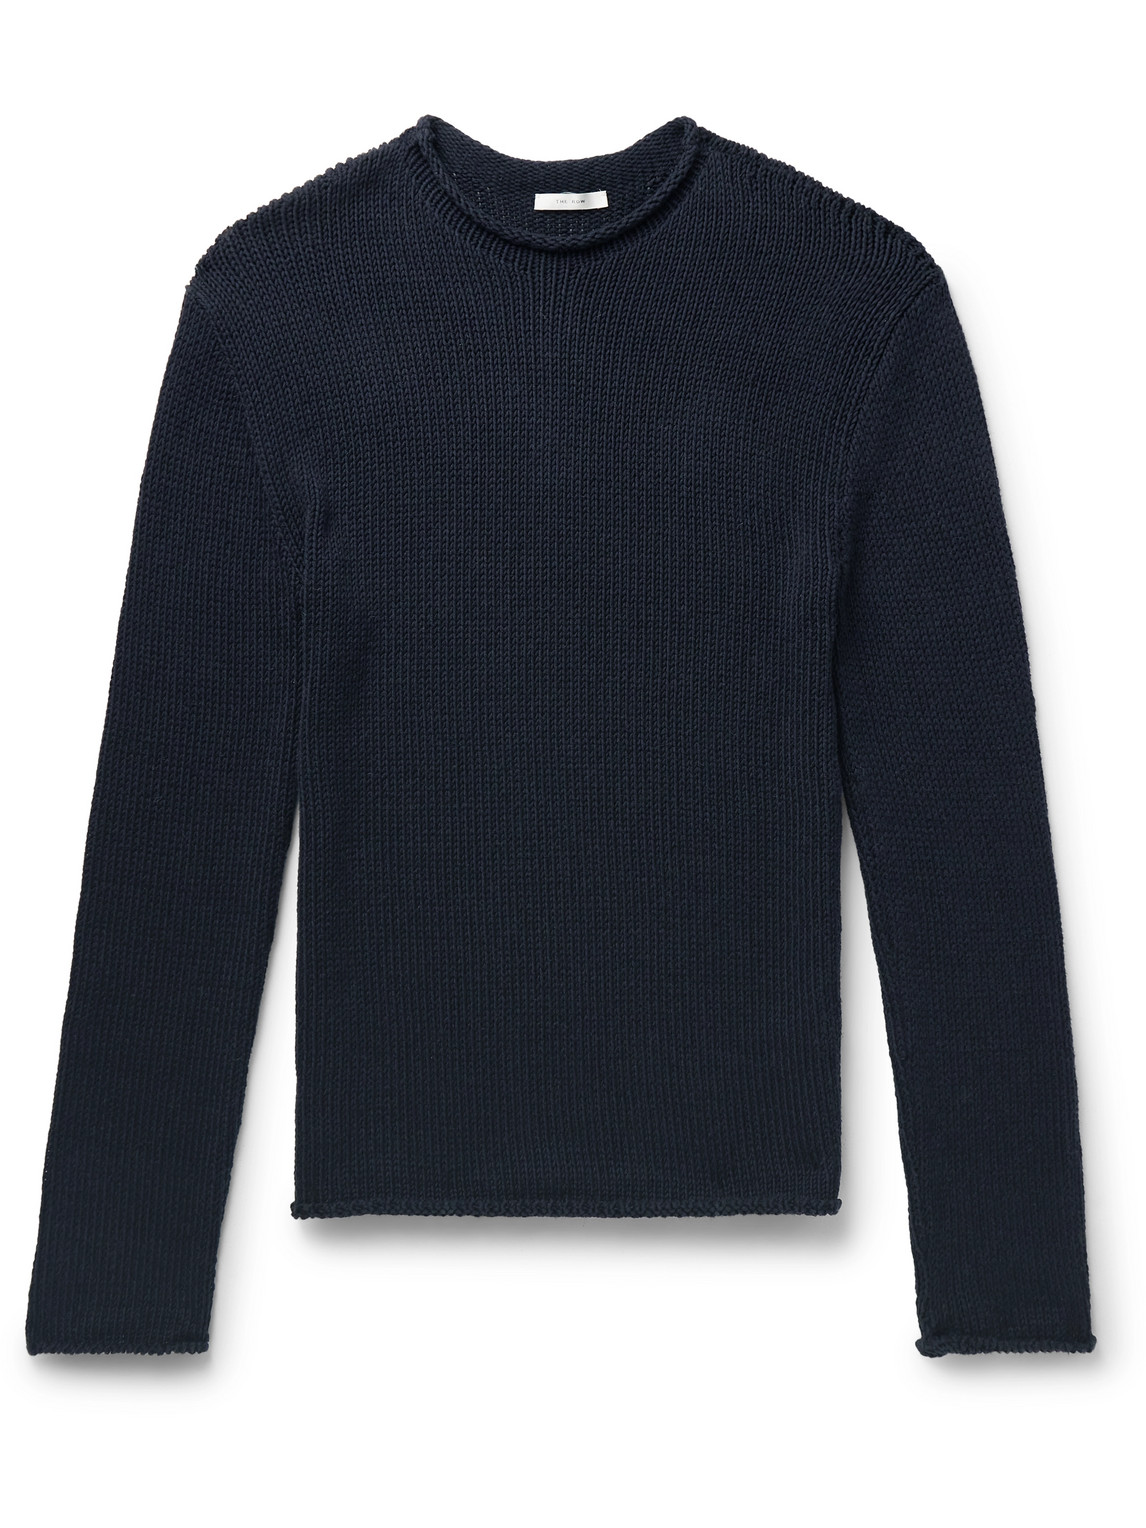 The Row - Anteo Cotton and Cashmere-Blend Sweater - Men - Blue - M von The Row